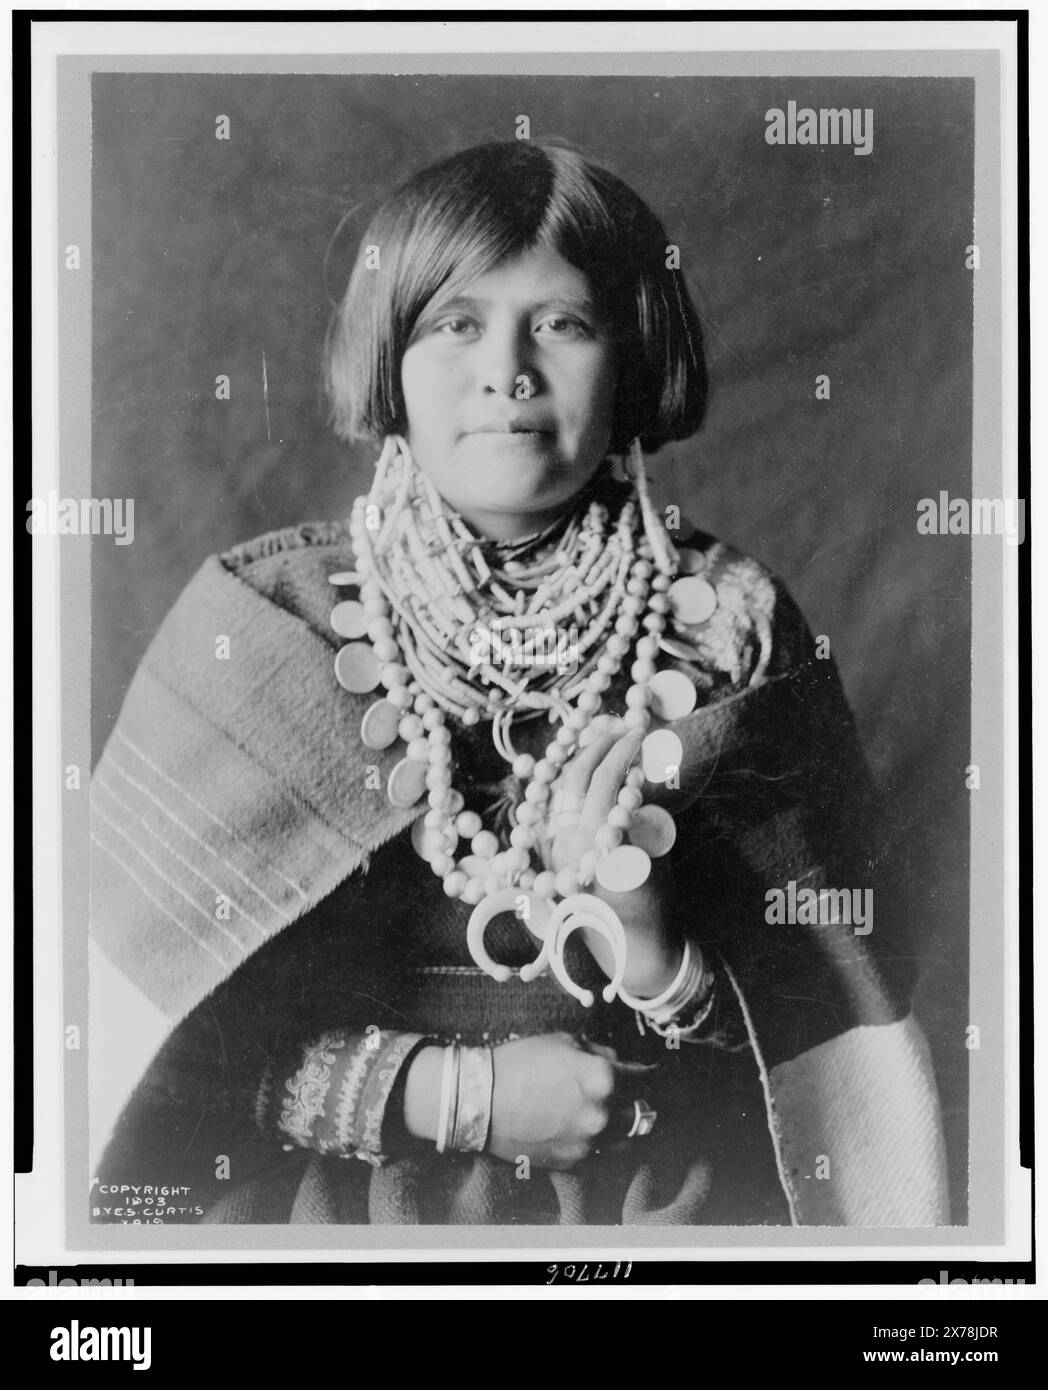 A Zuni girl, Edward S. Curtis Collection ., Curtis no. 819., Published in: The North American Indian / Edward S. Curtis. [Seattle, Wash.] : Edward S. Curtis, 1907-30, Suppl., v. 17, pl. 613.. Indians of North America, Clothing & dress, 1900-1910. , Zuni Indians, Clothing & dress, 1900-1910. Stock Photo